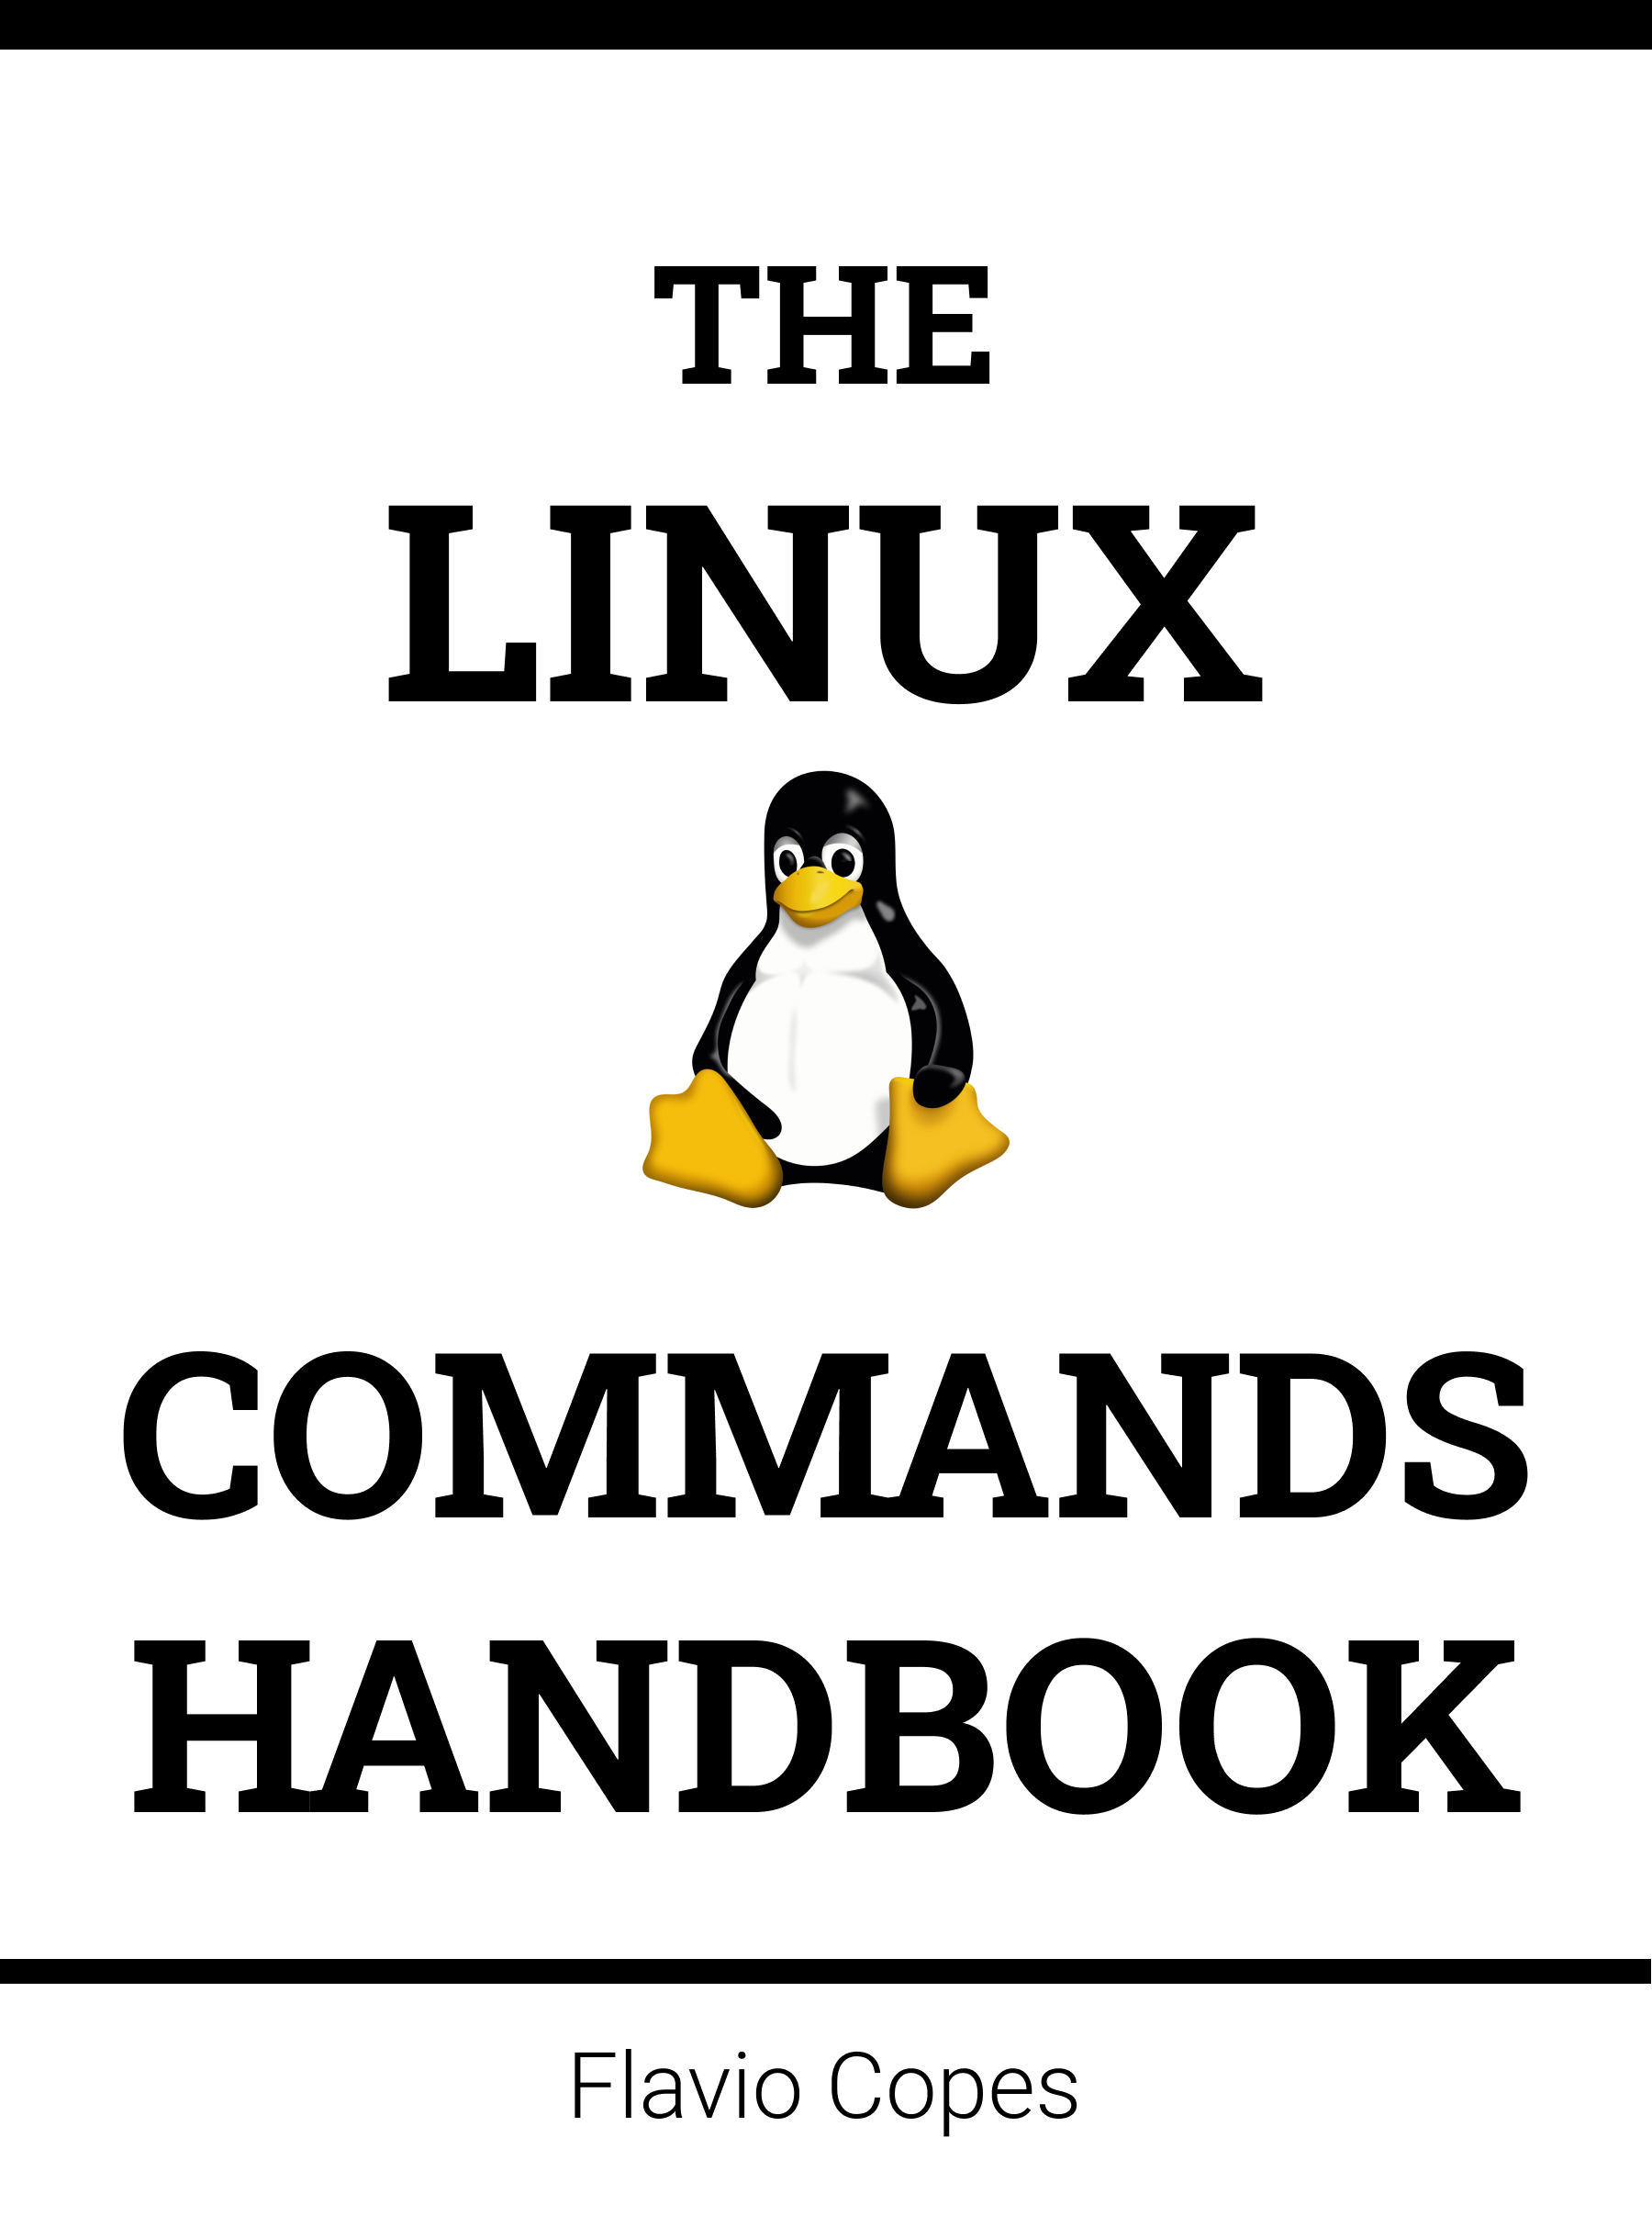 The Linux Commands Handbook, by Flavio